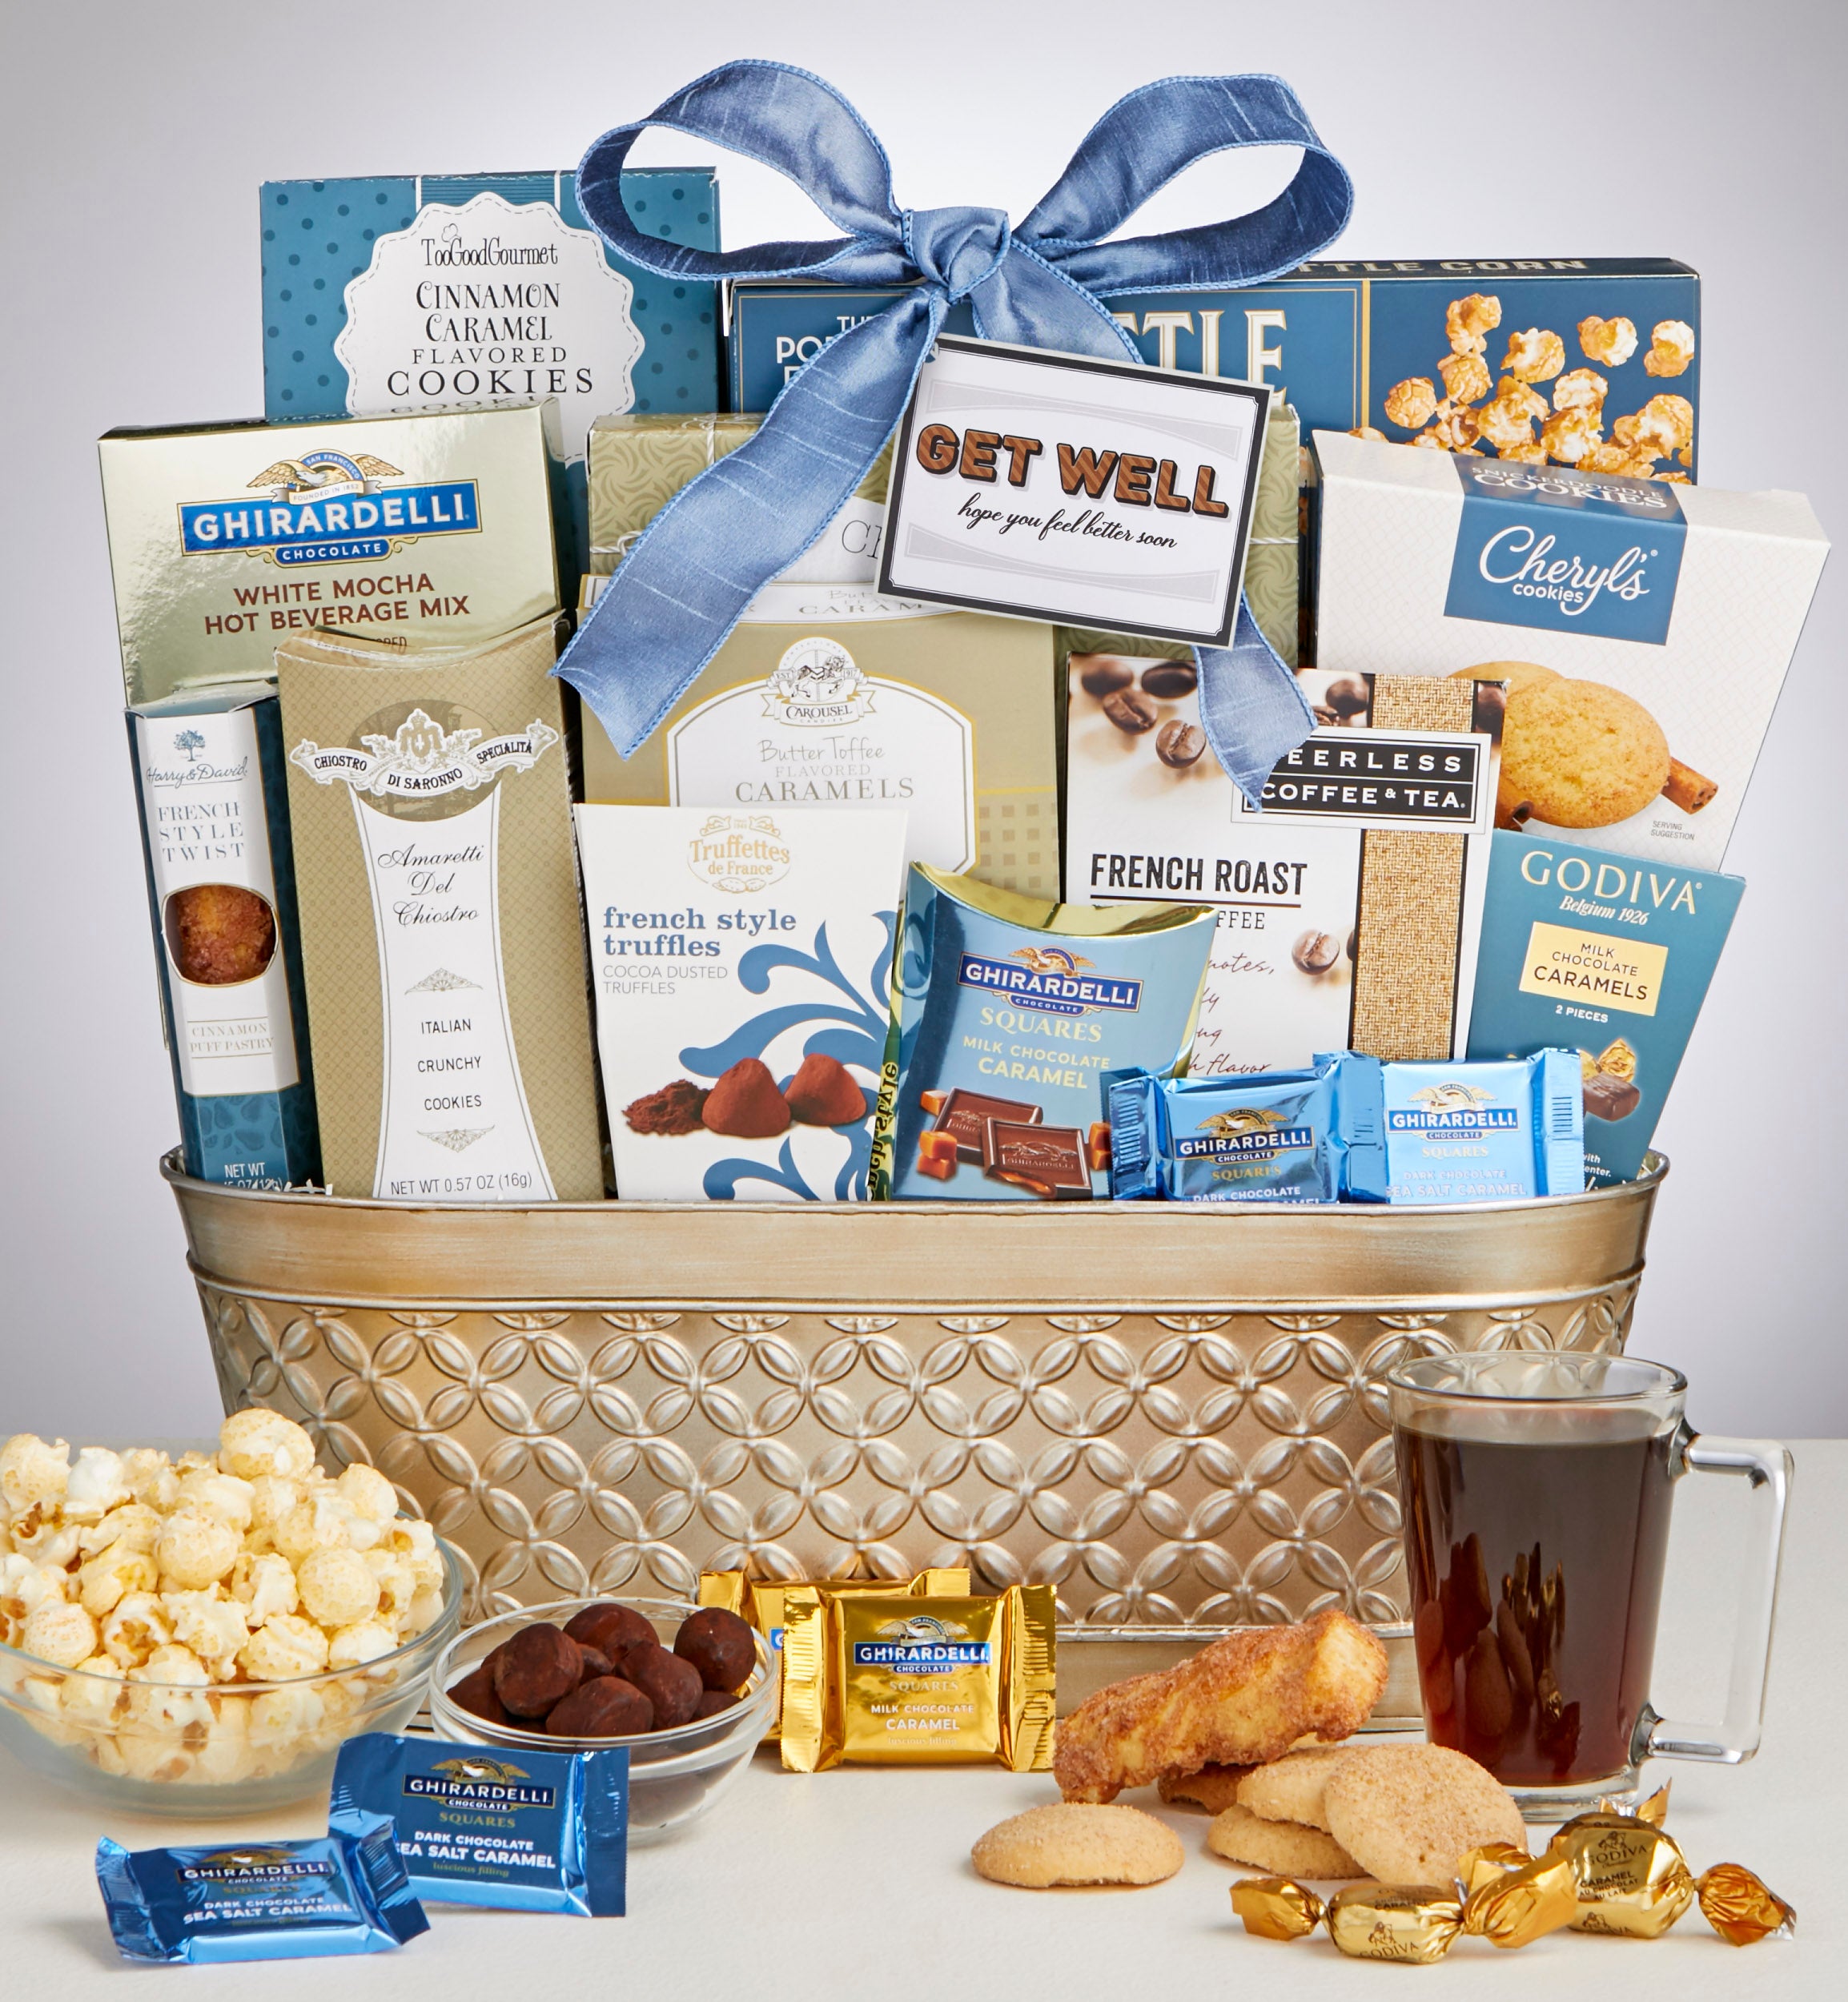 Get Well Soon Gifts & Gift Baskets